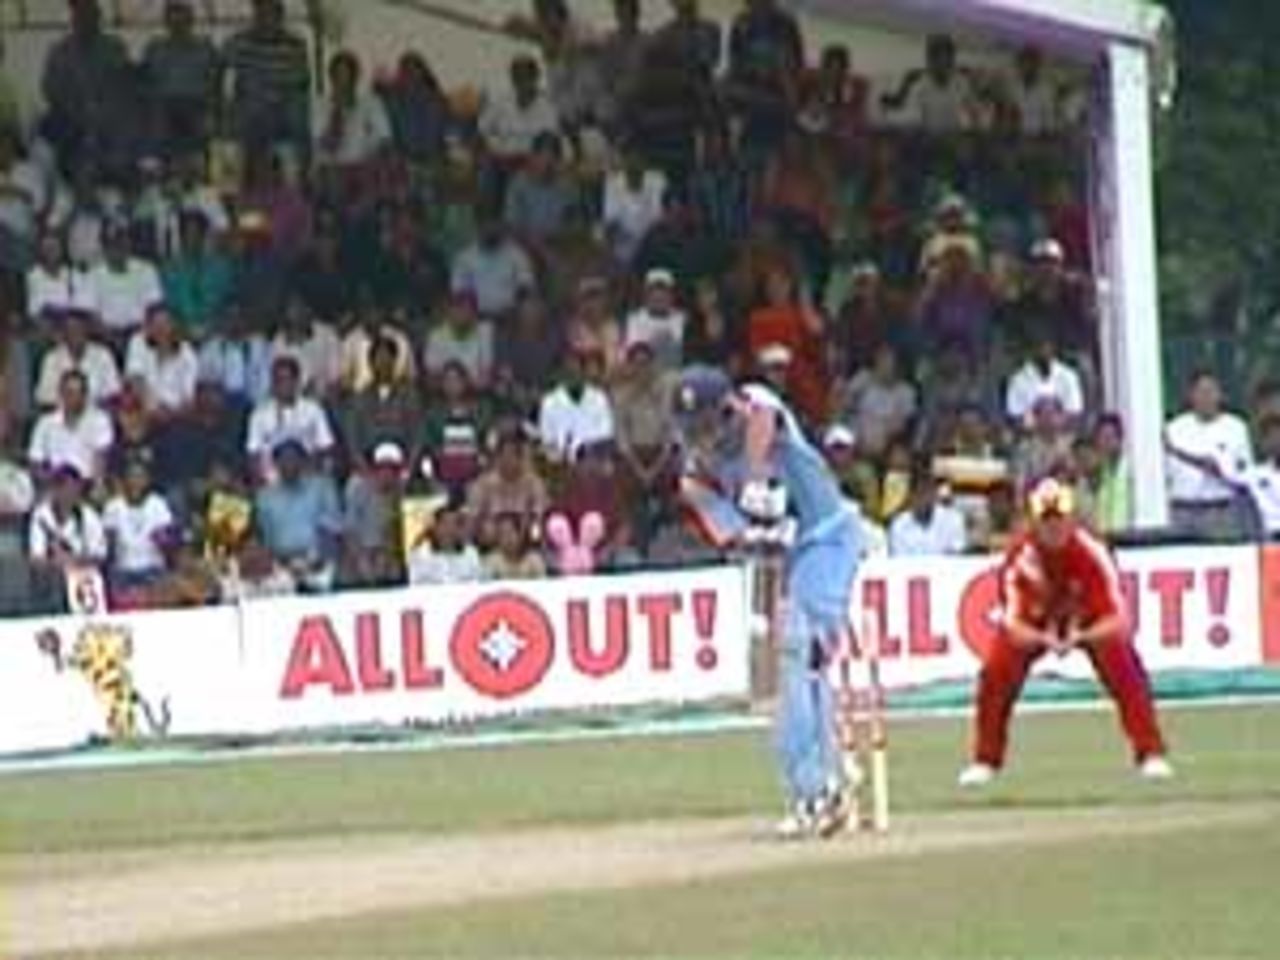 Tendulkar tip-toes, as he watchfully turns a ball to the leg-side, India v Zimbabwe (2nd ODI), Coca-Cola Singapore Challenge, 1999-2000, Kallang Ground, Singapore, 4 Sep 1999